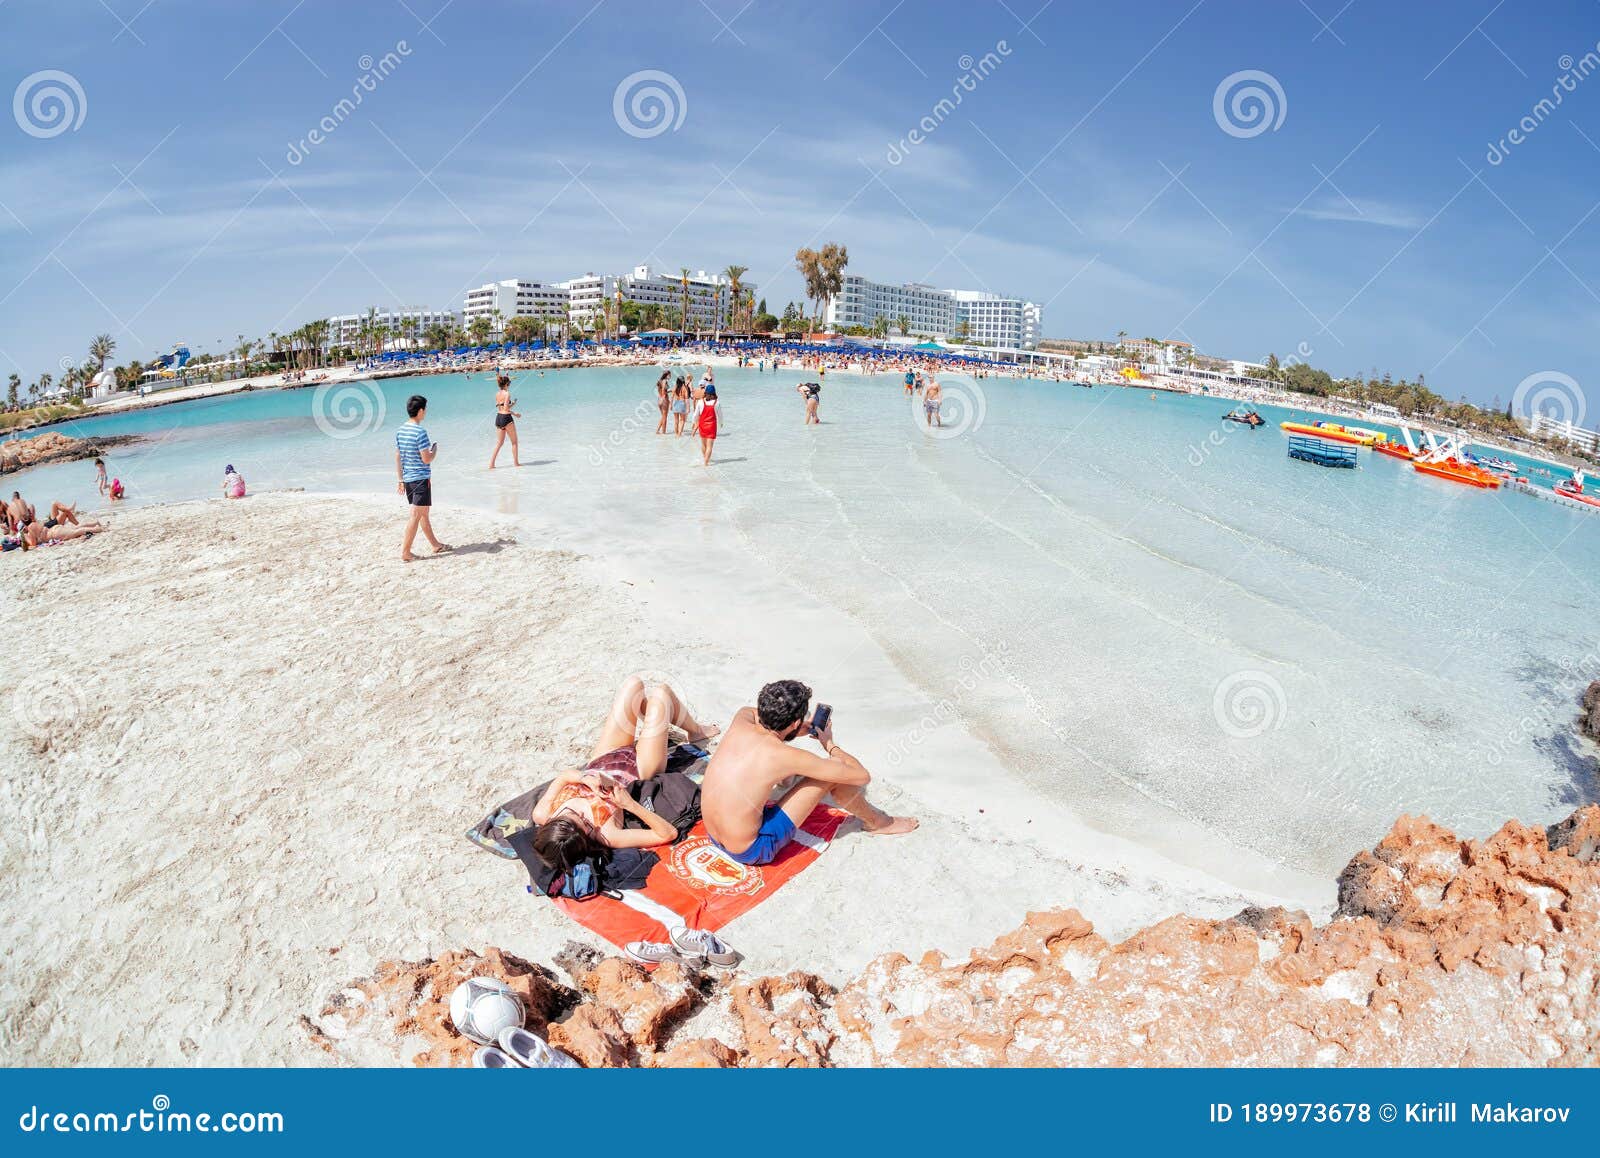 Ayia Napa Cyprus August 12 2019 People Relaxing At Nissi Beach